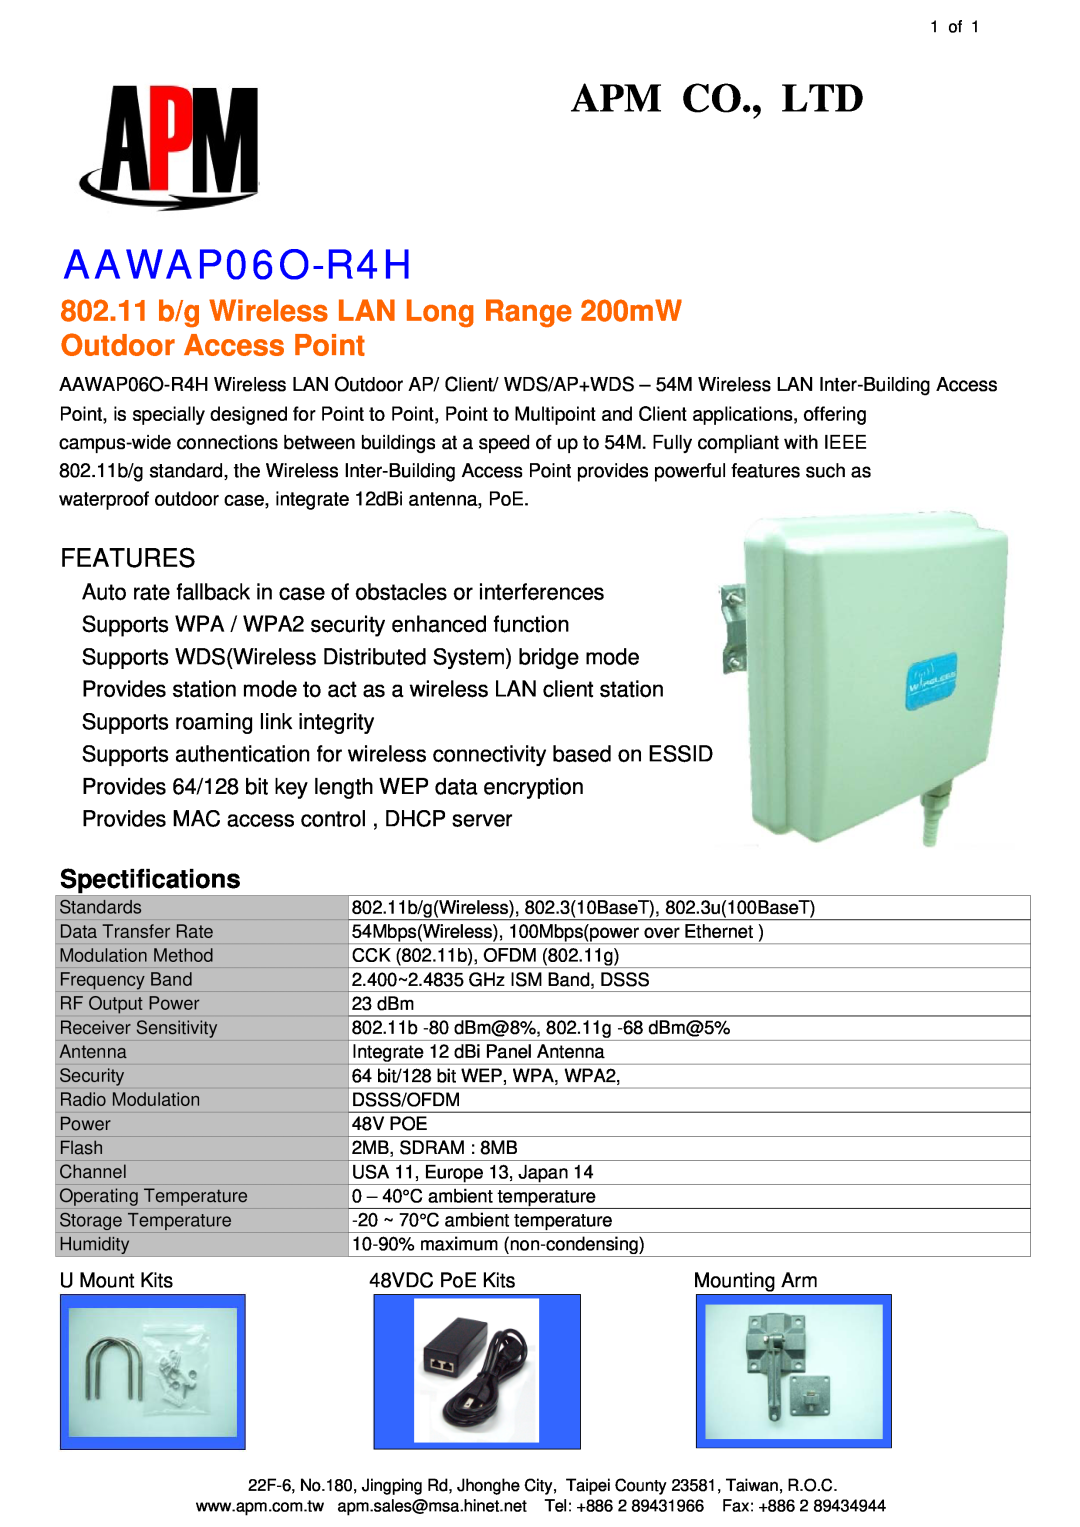 APM AAWAP06O-R4H manual 802.11 b/g Wireless LAN Long Range 200mW Outdoor Access Point, Features, Spectifications 